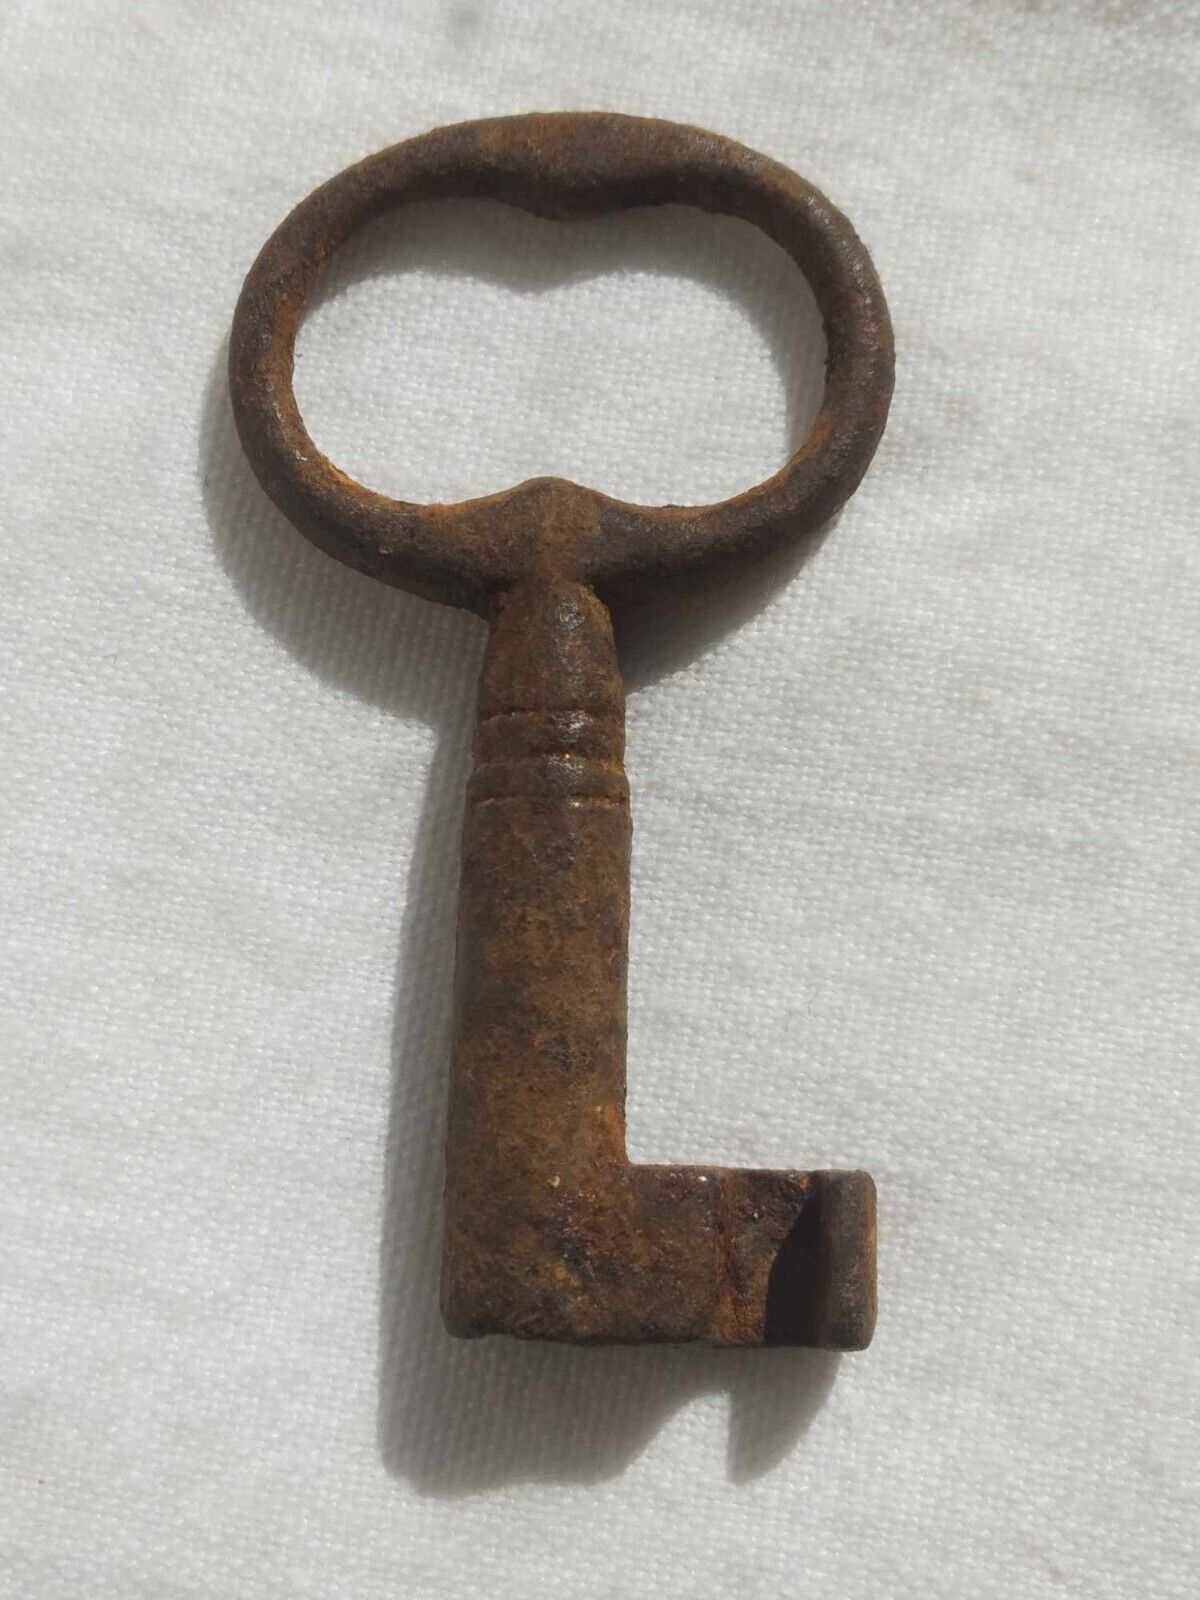 Antique old collectible metal key skeleton small piece of furniture or box 1